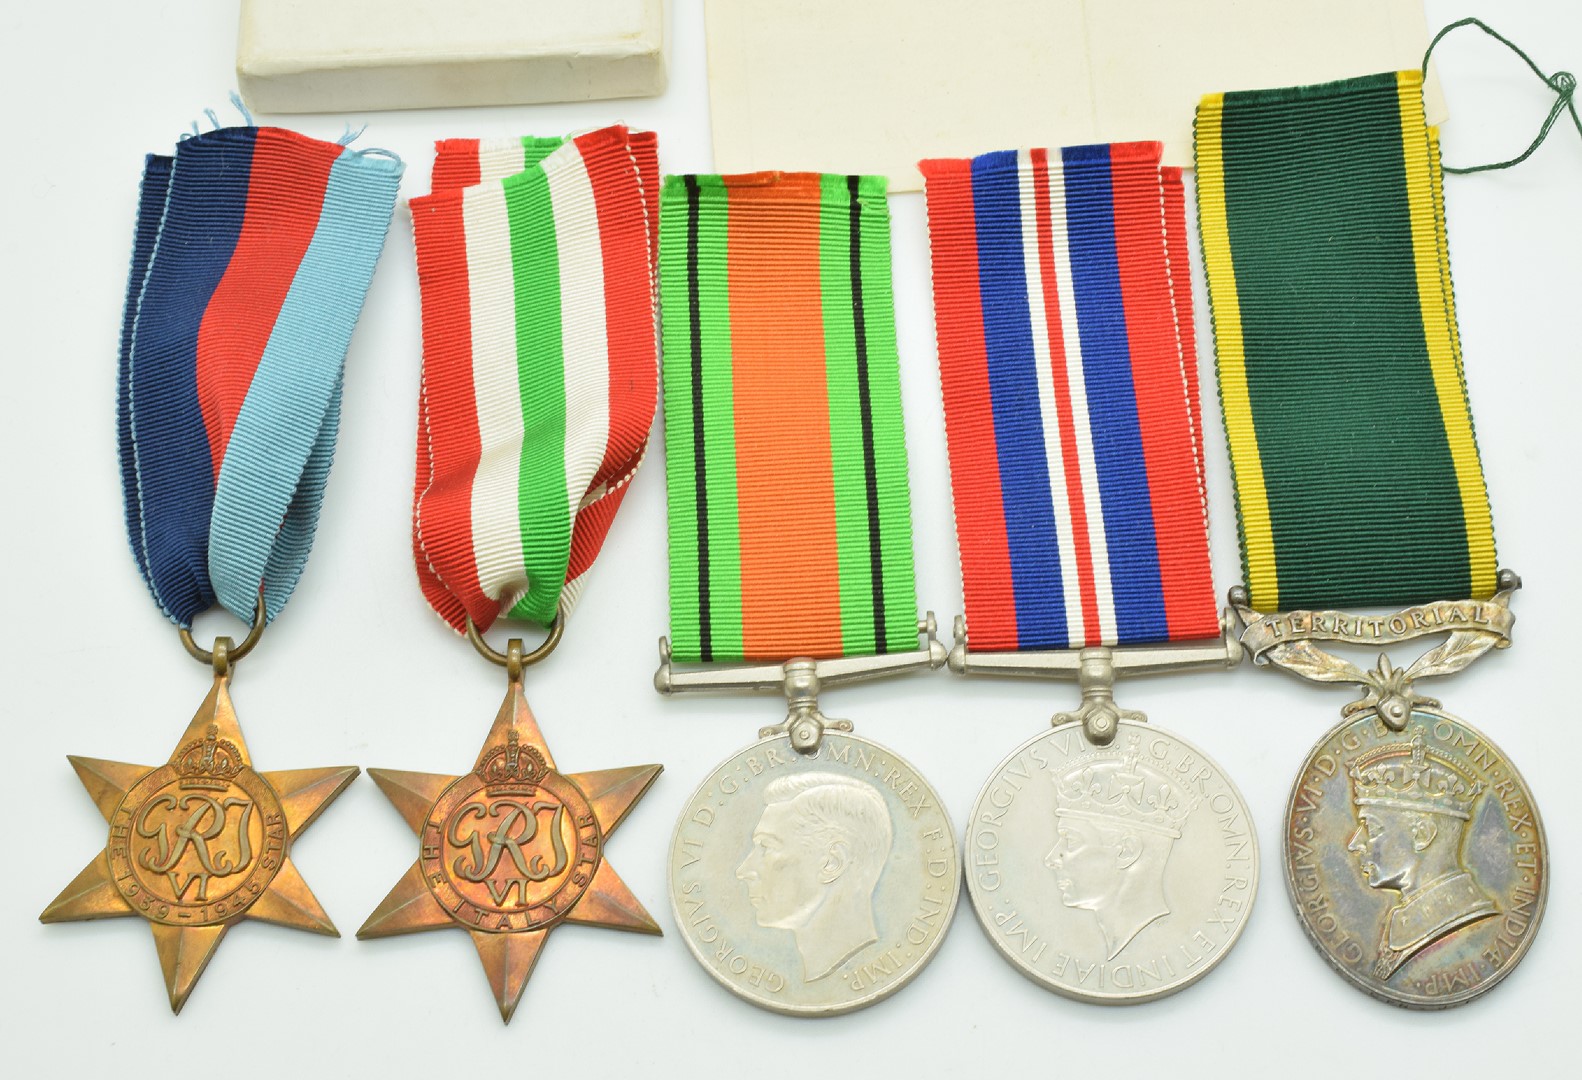 British Army WW2 medals comprising 1939-1945 Star, Italy Star, Defence Medal, War Medal and - Image 2 of 5